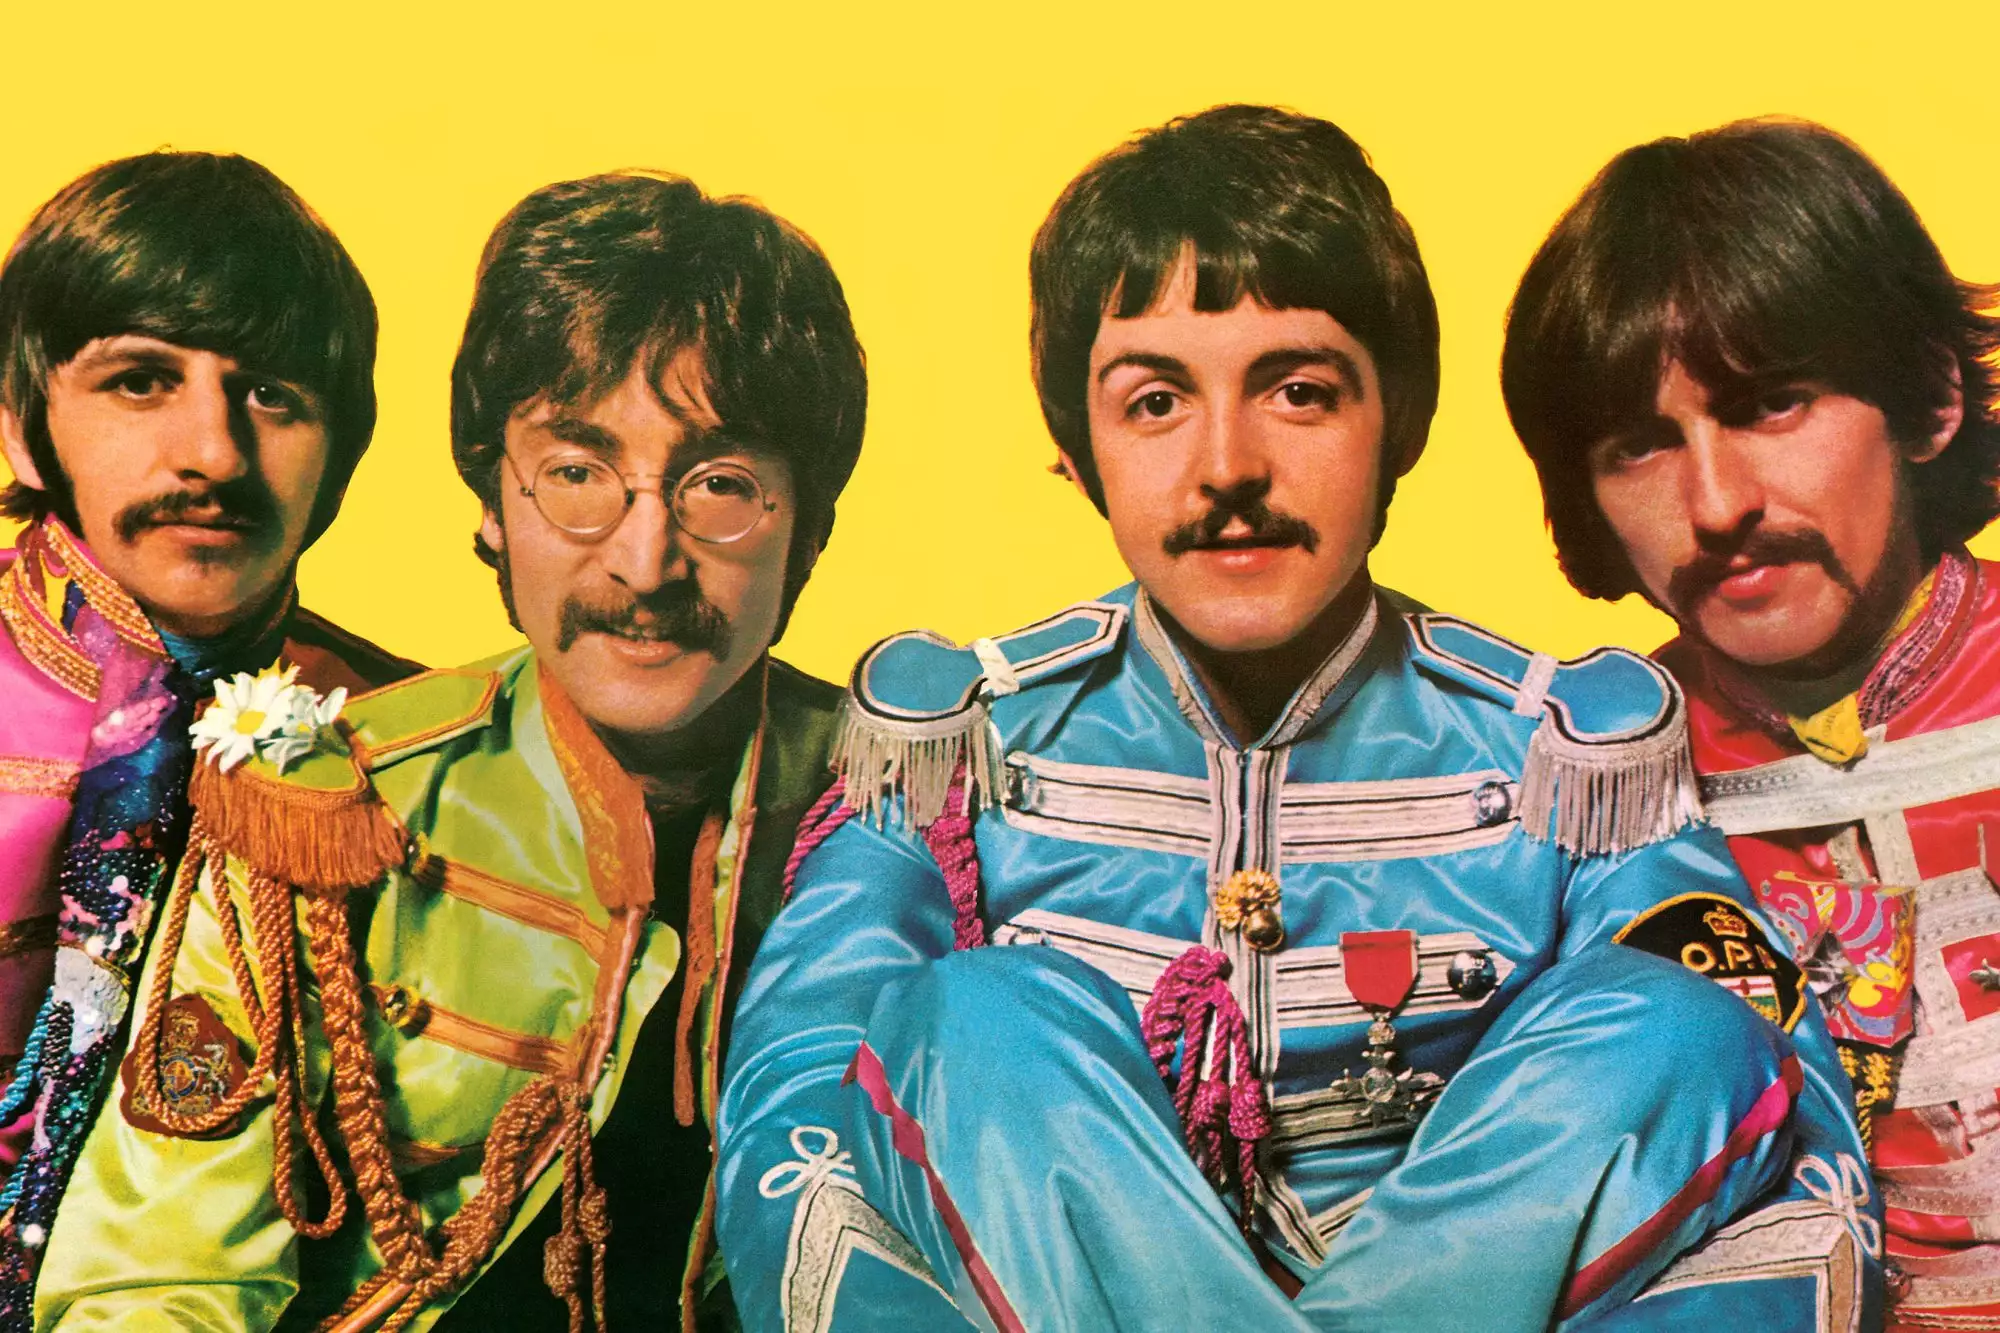 The Beatles Sgt. Pepper's Lonely Hearts Club Band